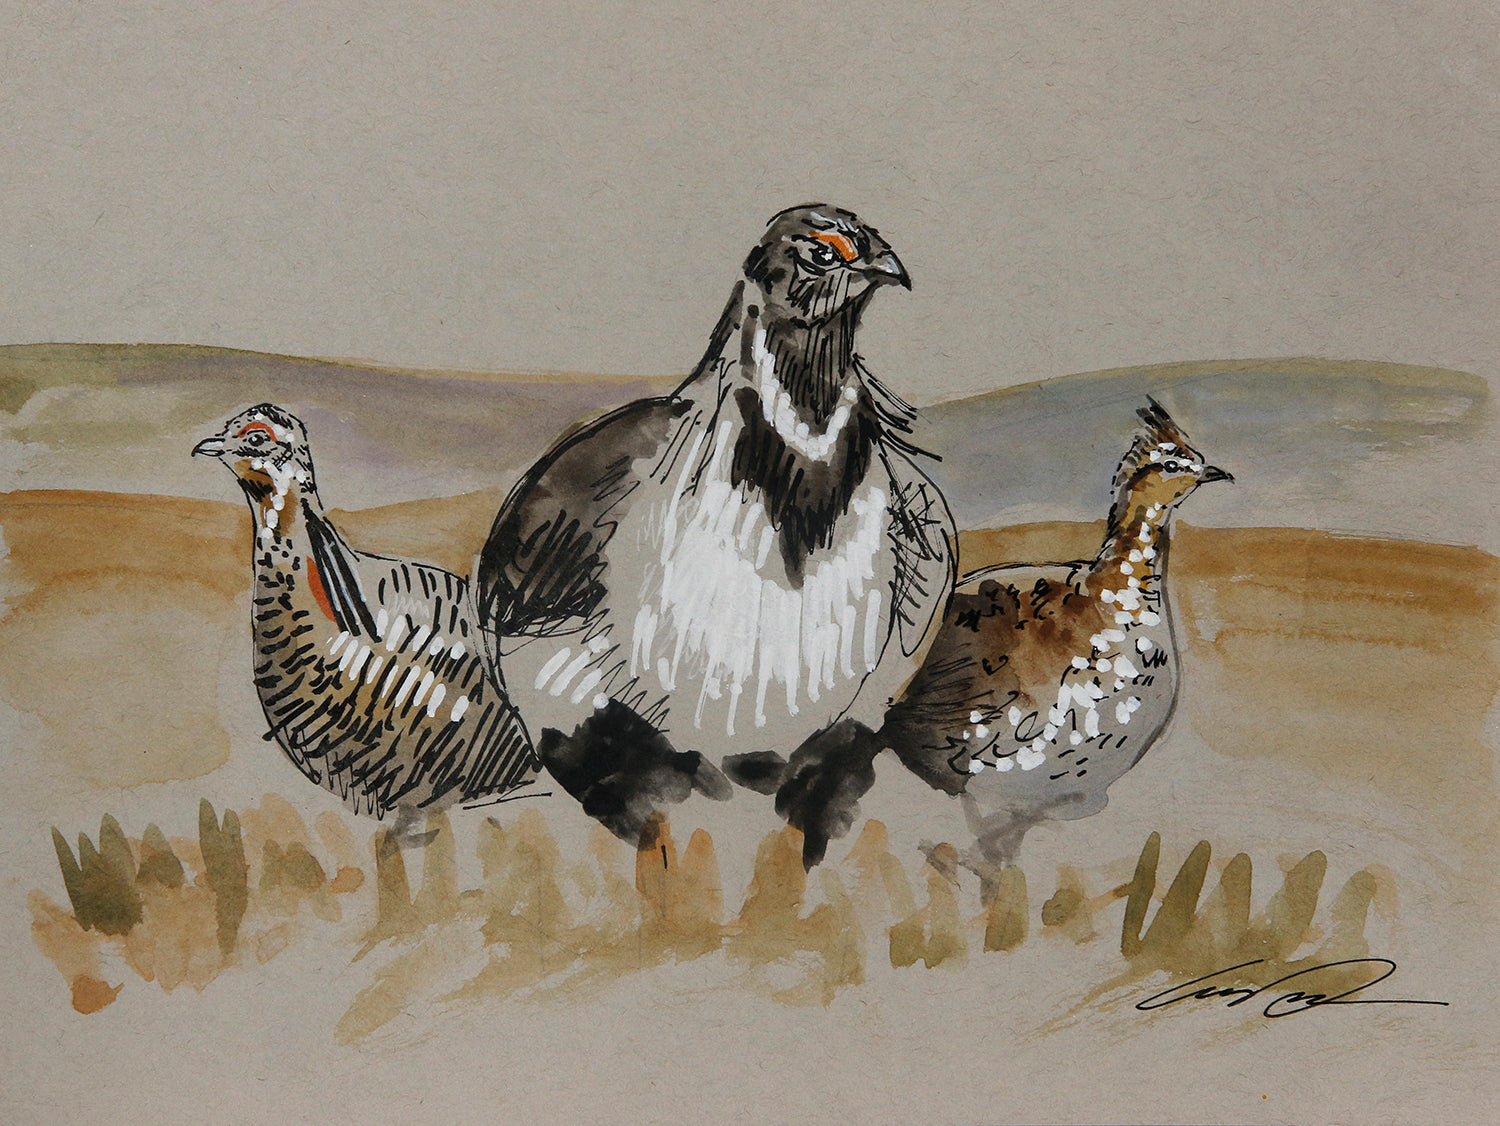 A sketch showing three different grouse in a prairie